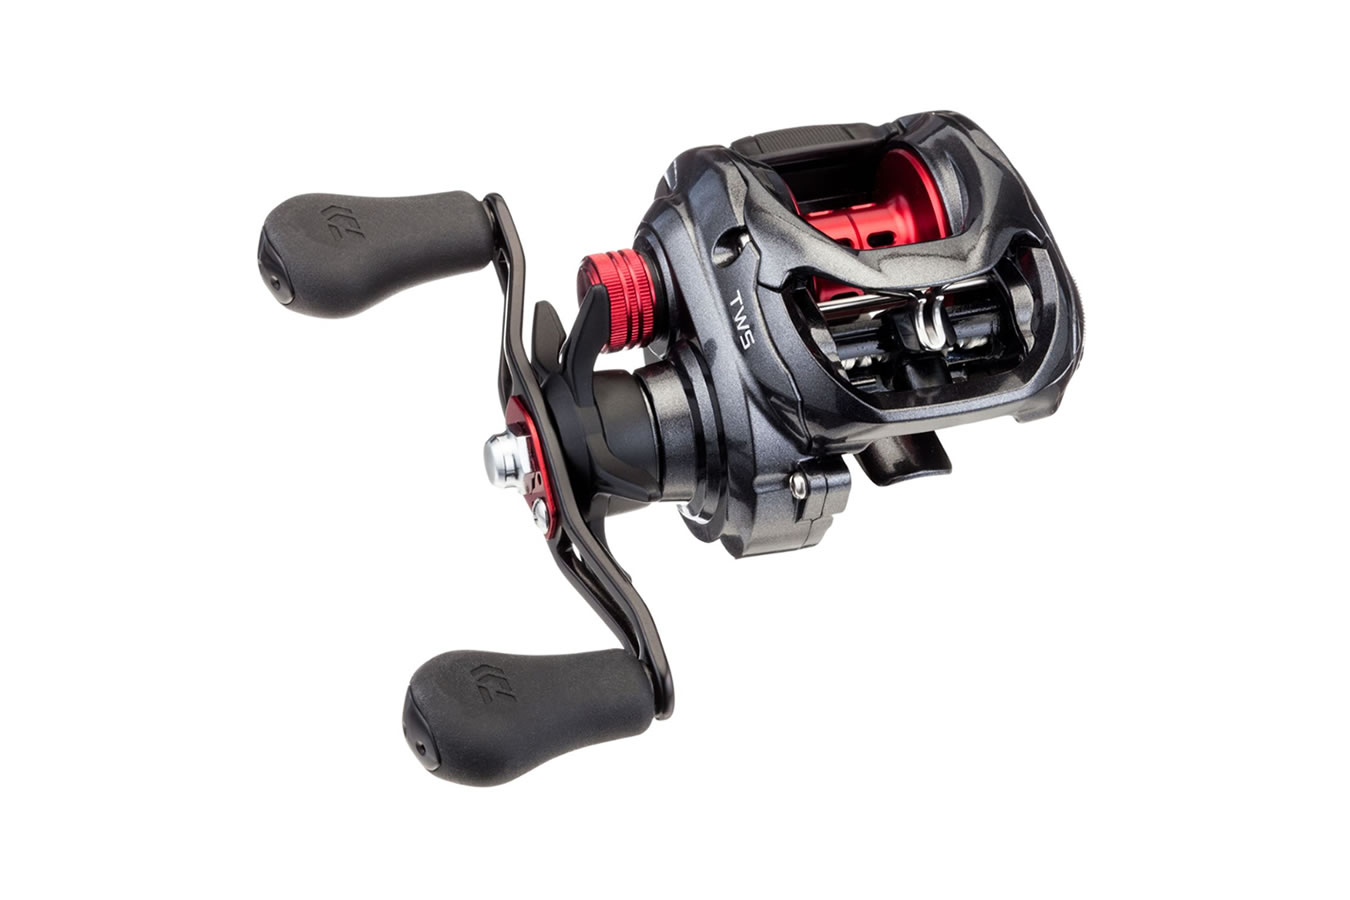 Discount Daiwa Tatula CT - Baitcasting Reel (7.3:1) Right Handed for Sale, Online Fishing Reels Store